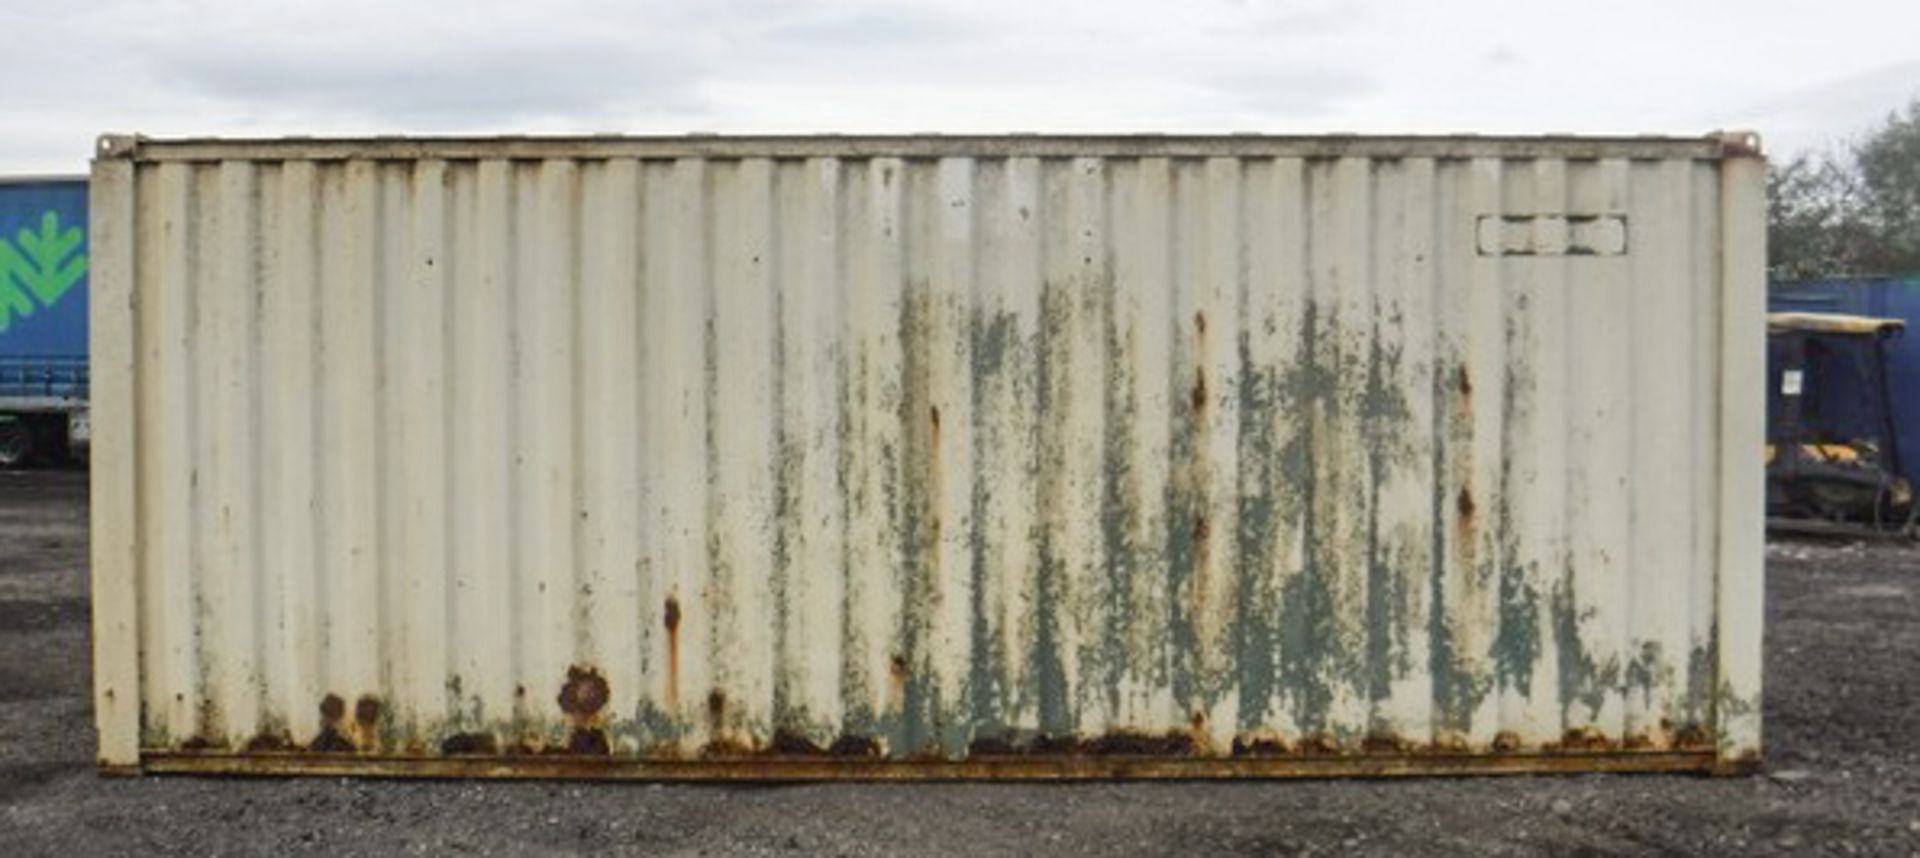 USED 20 X 8 STORAGE CONTAINER, LIFTING EYES, NO FORKLIFT POCKETS, NO KEY, S/N SS2280 - Image 4 of 4